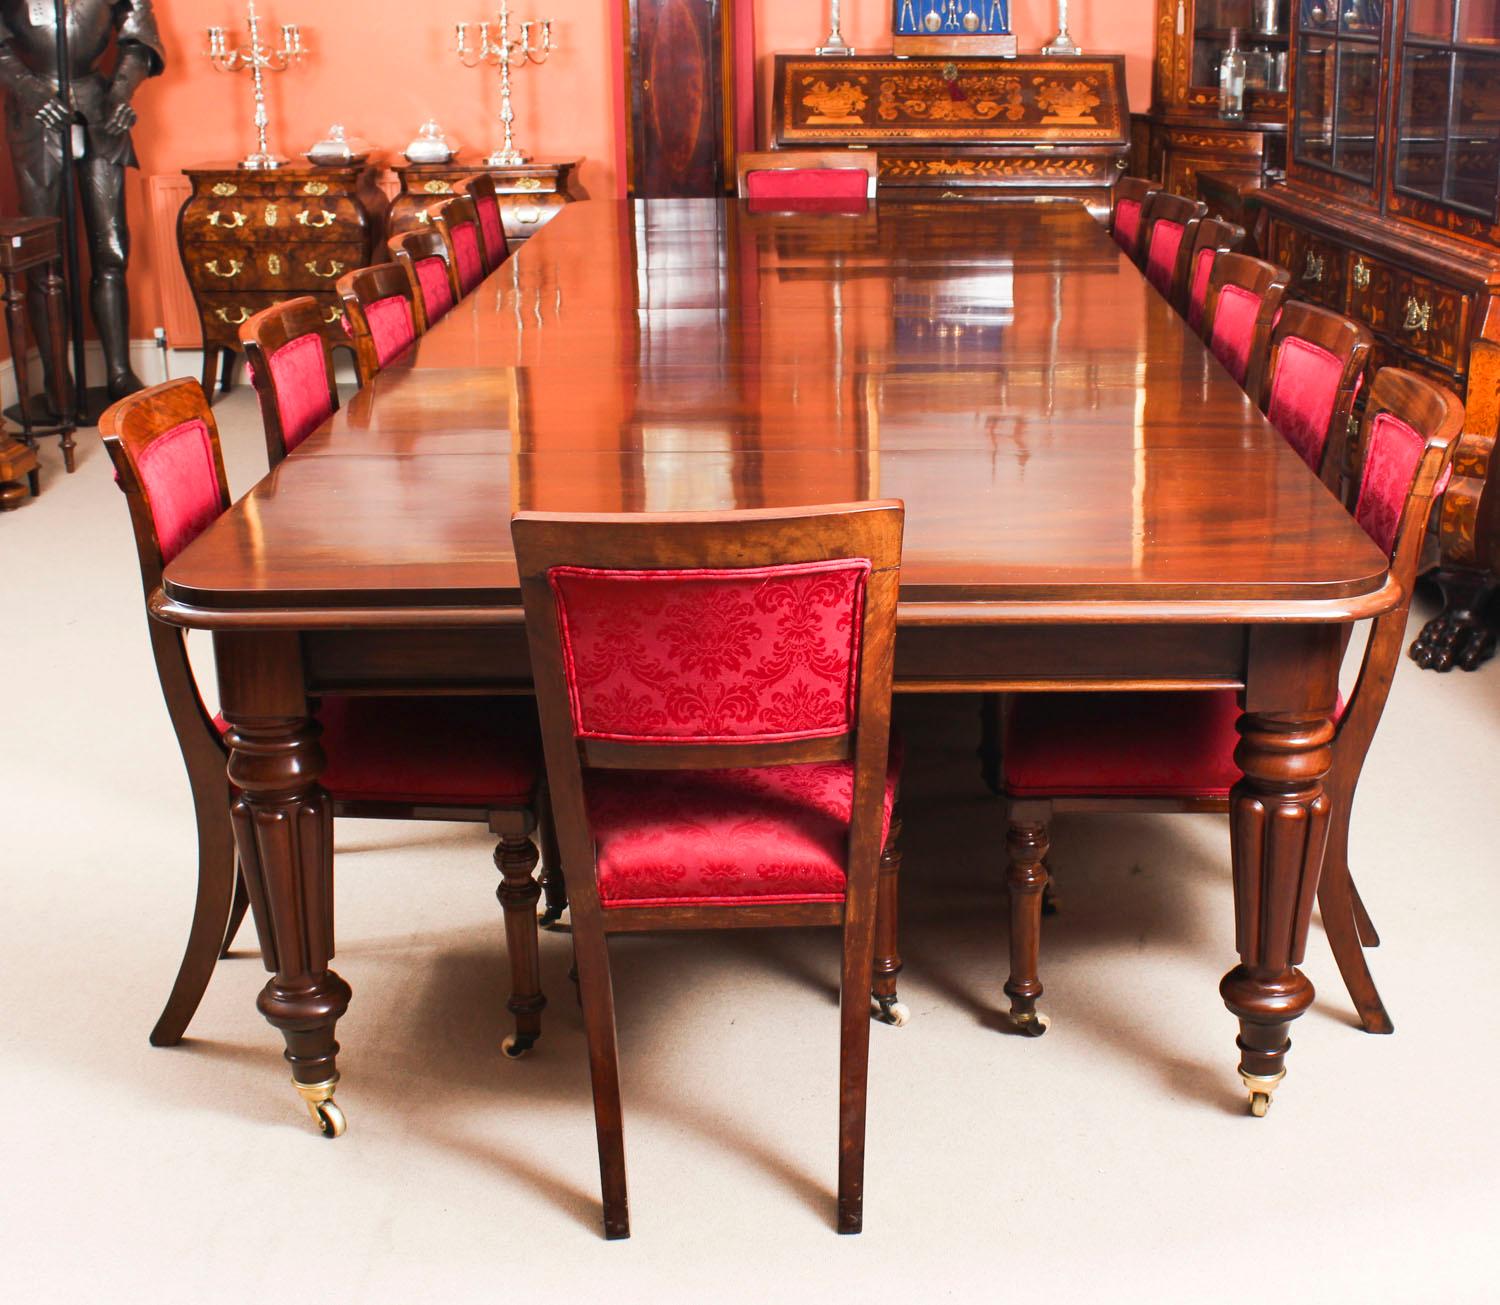 This is a magnificent antique dining set comprising a William IV solid mahogany dining table, circa 1830 in date and a set fourteen antique Victorian dining chairs, circa 1870 in date.

This beautiful table has a rounded rectangular top with a